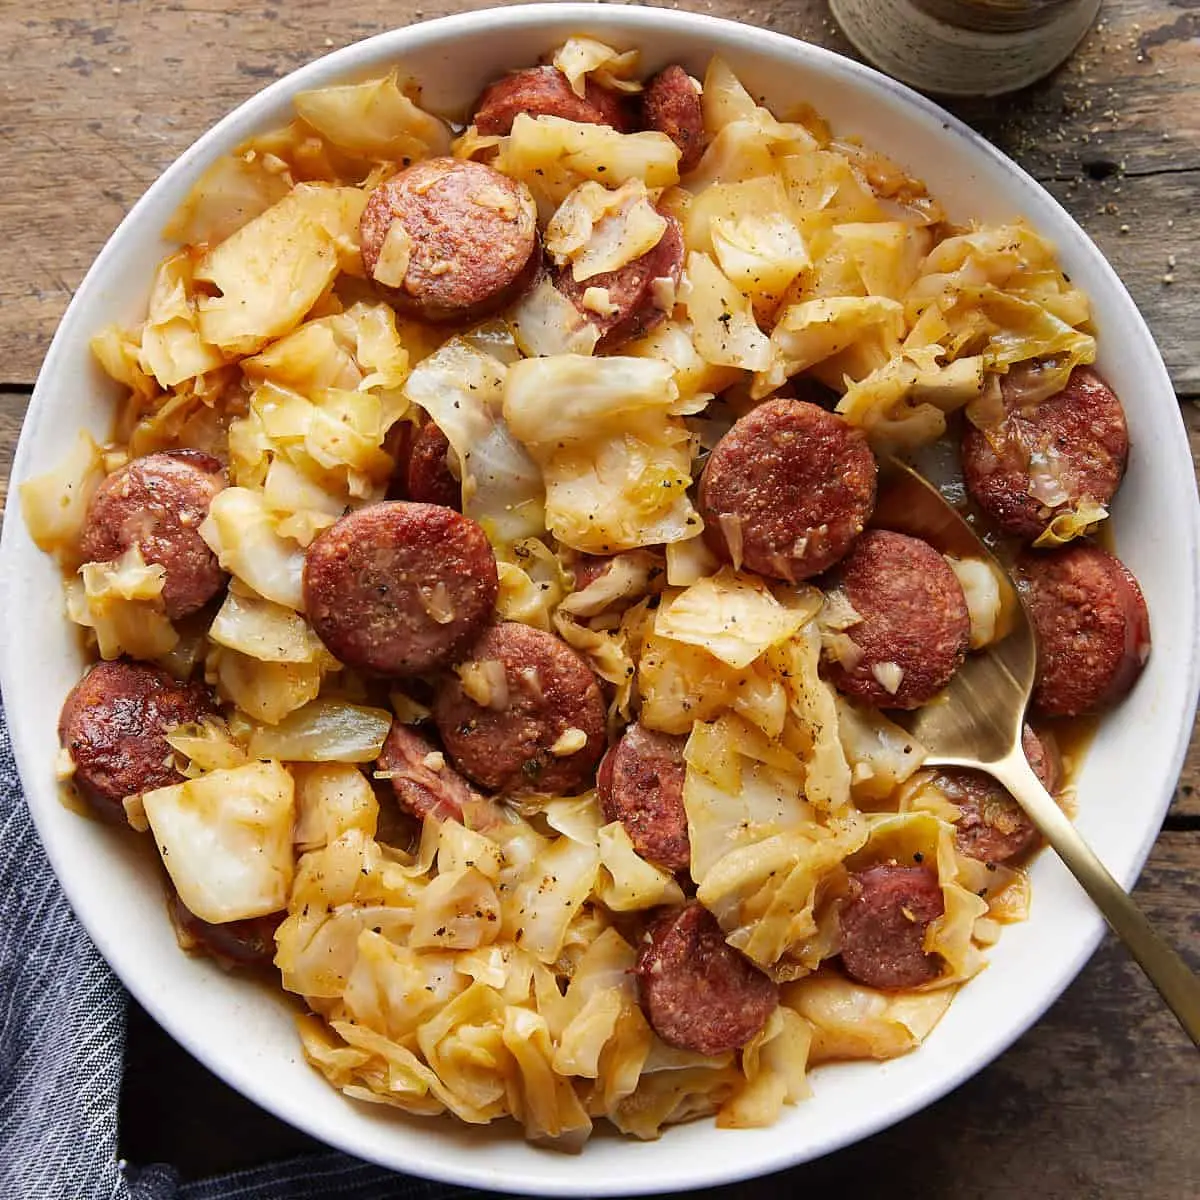 fried cabbage with smoked sausage - What kind of meat goes with cabbage